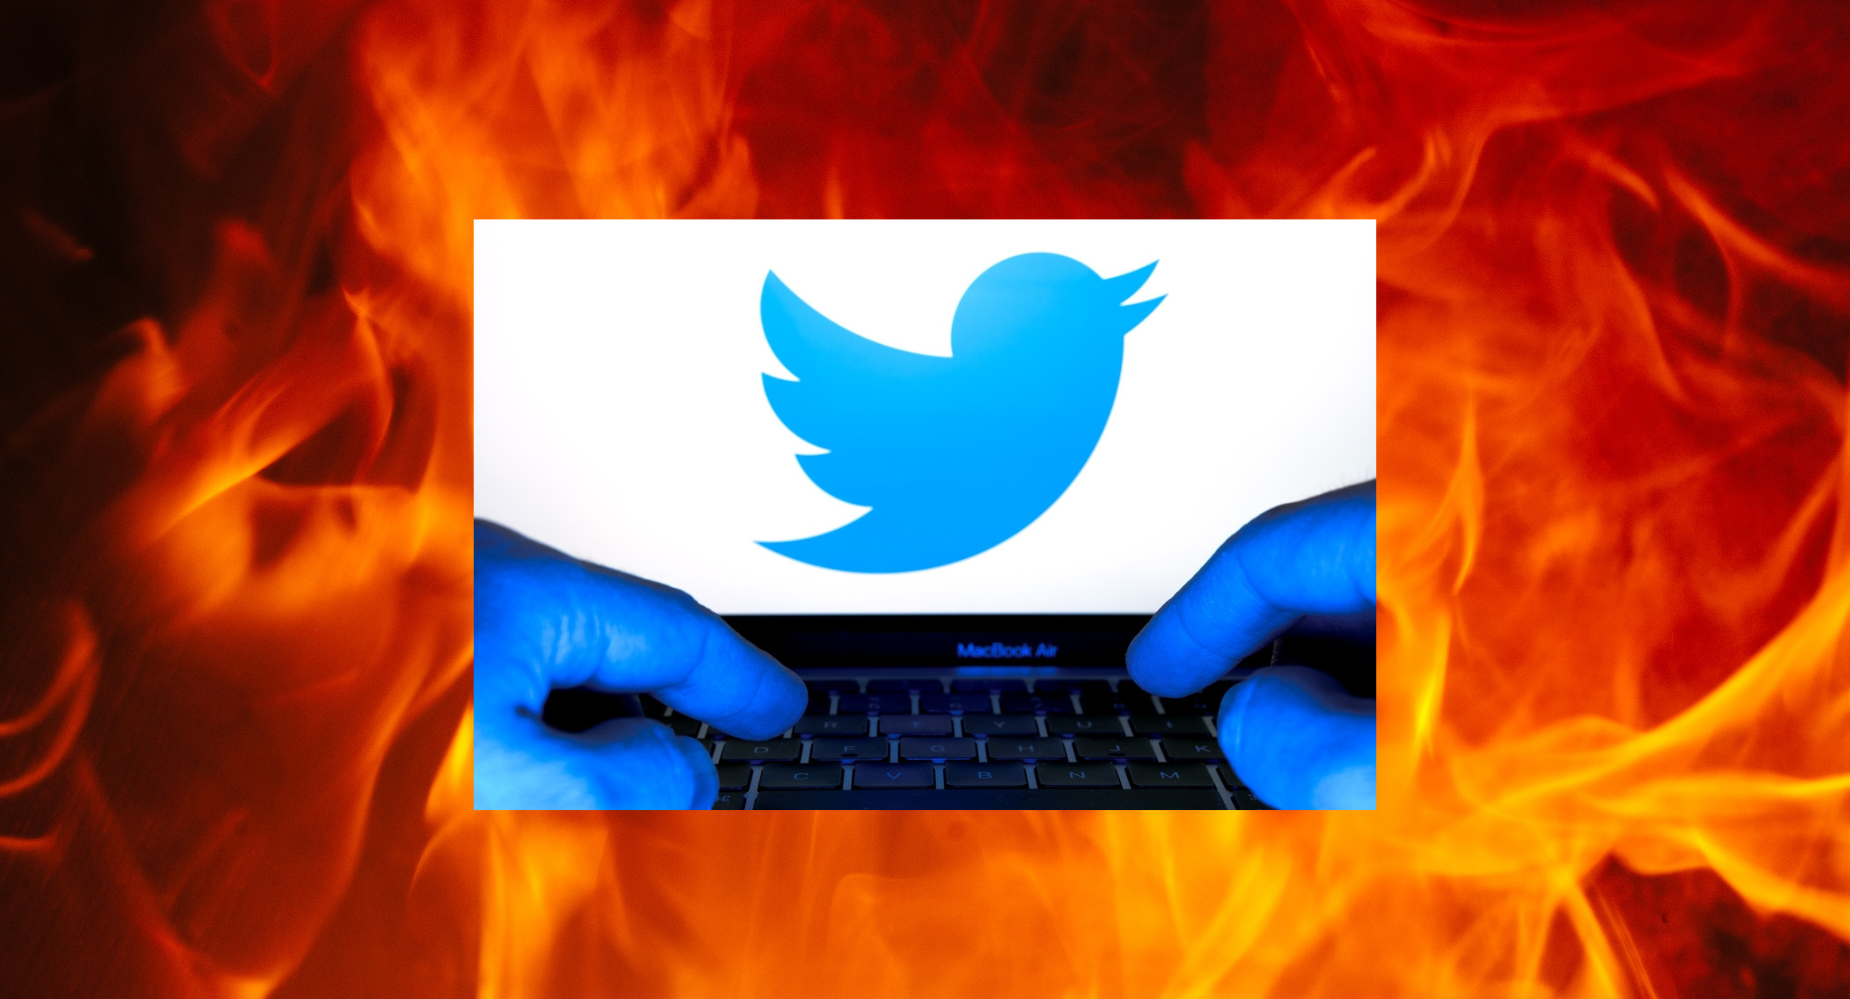 Hot Take: Twitter Investors Should Buy The Dip Amid Whistleblower Allegations